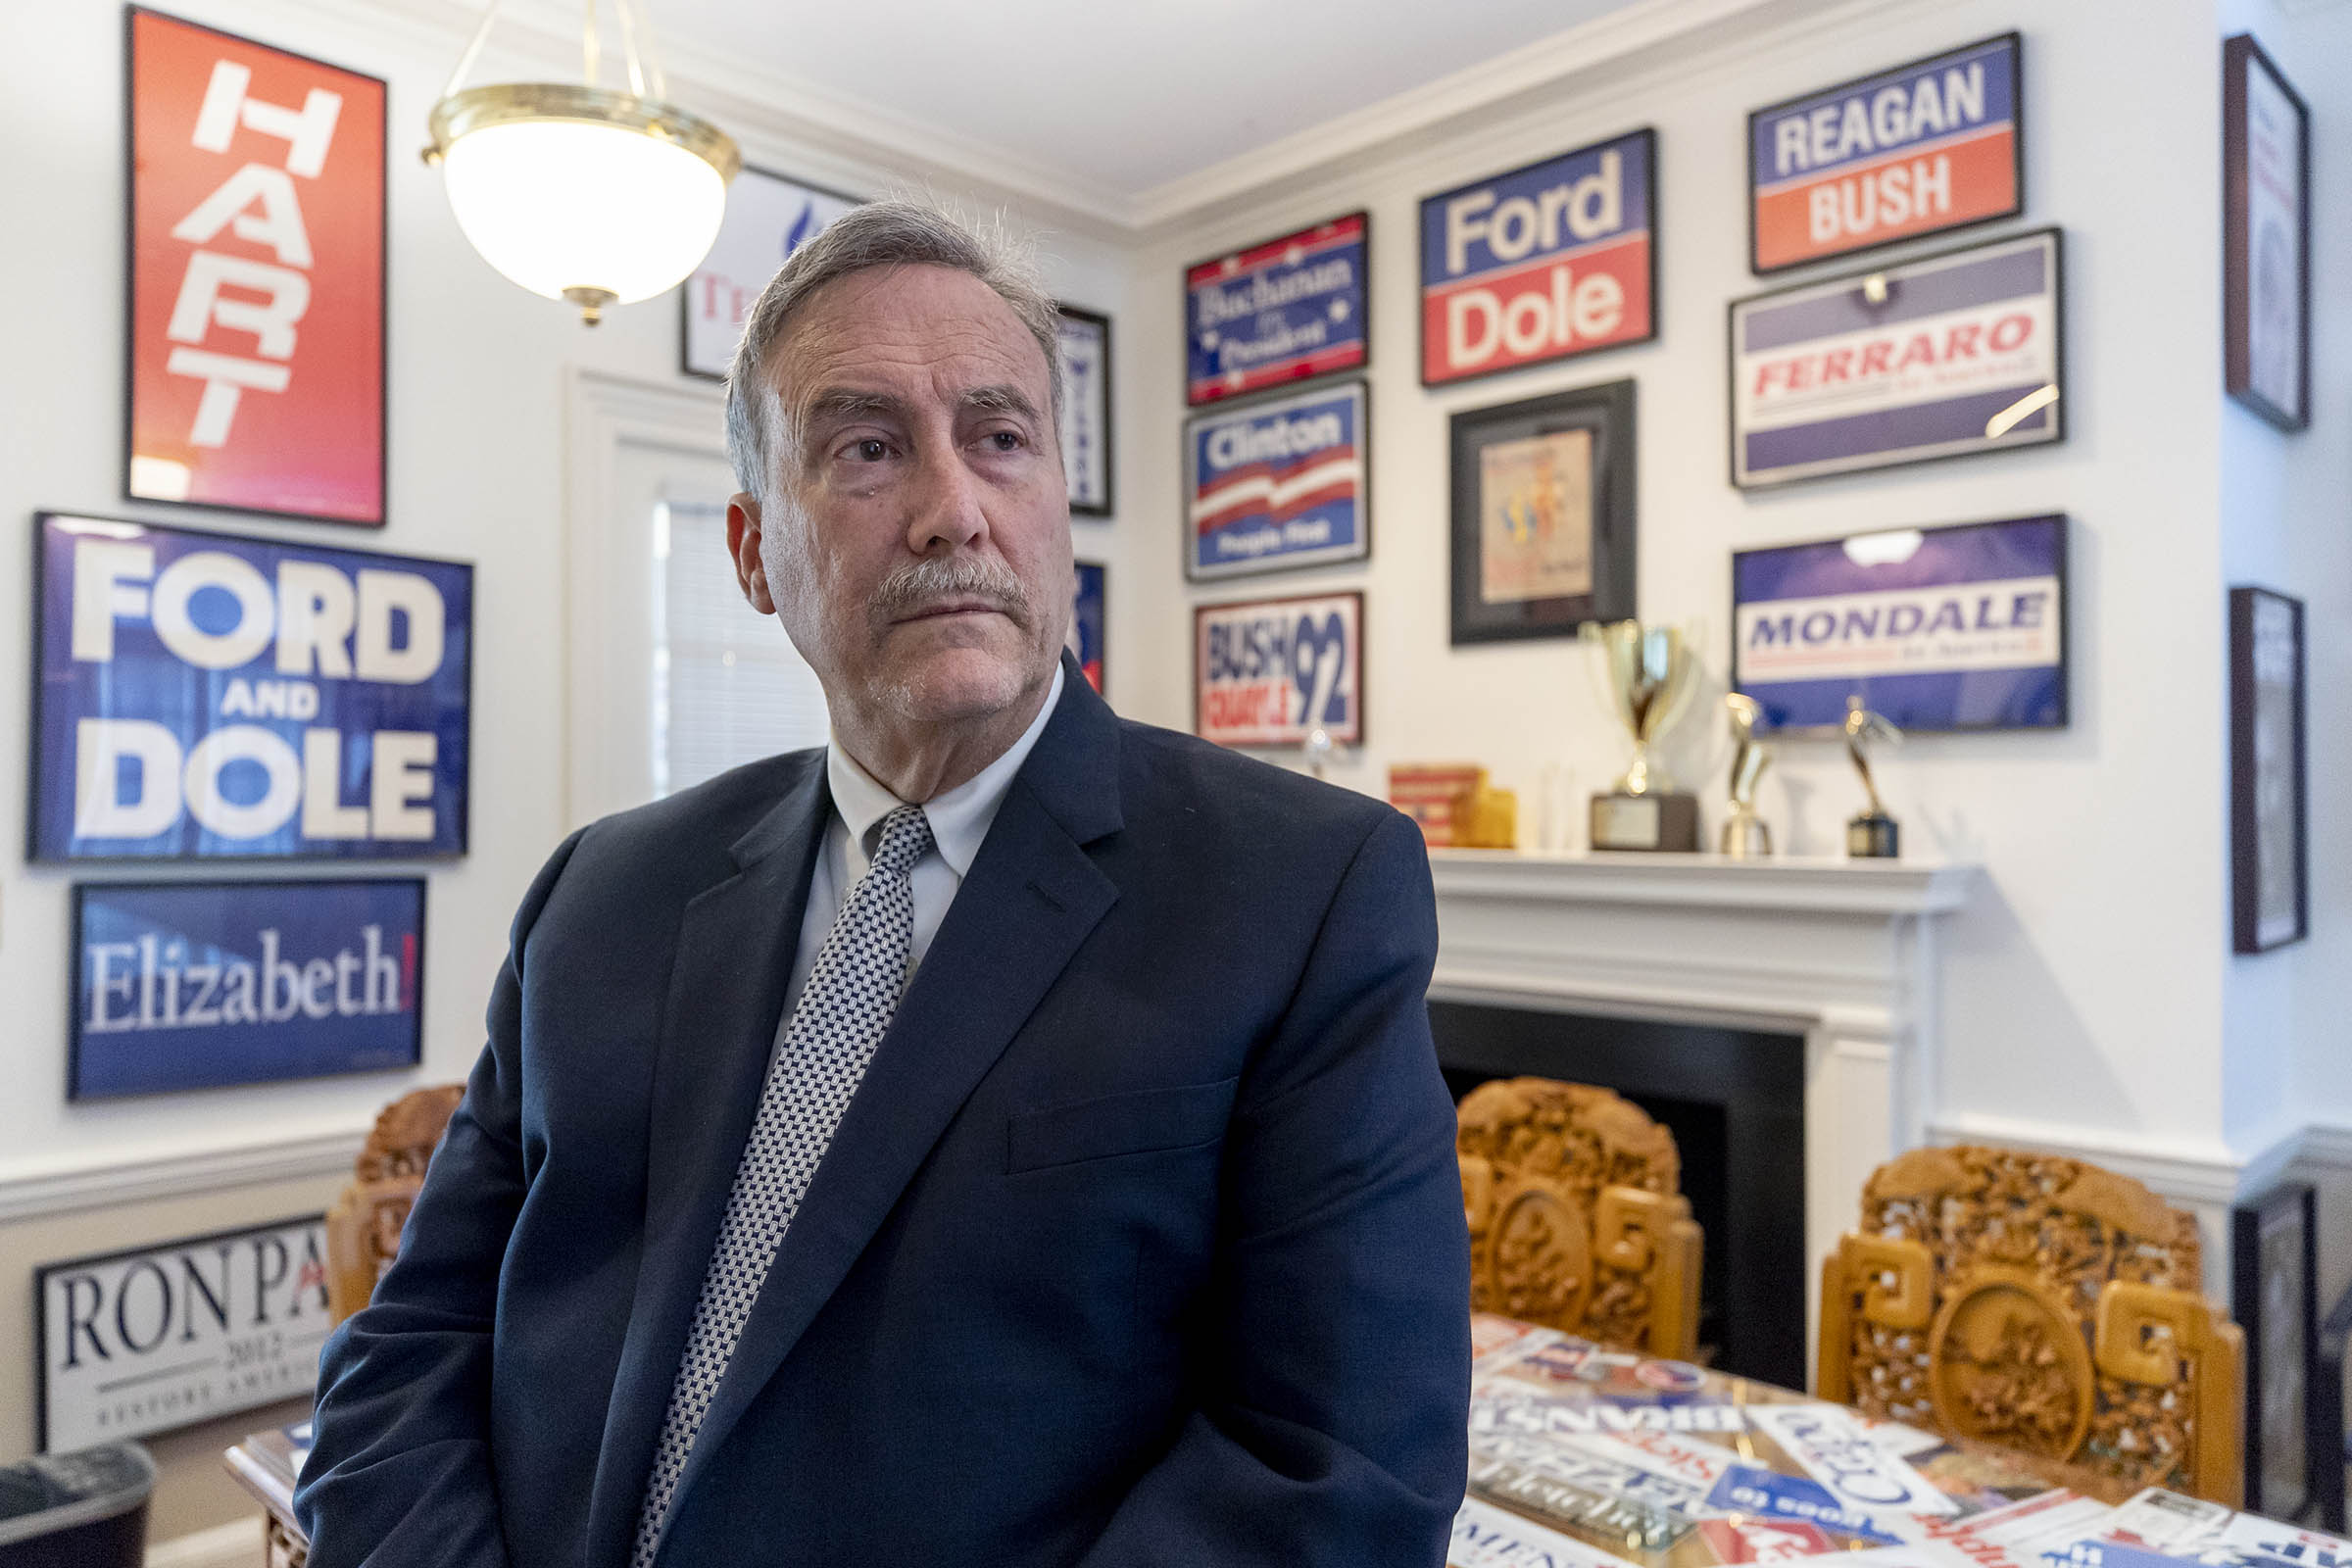 Larry Sabato stands at a table looking to the right of the camera